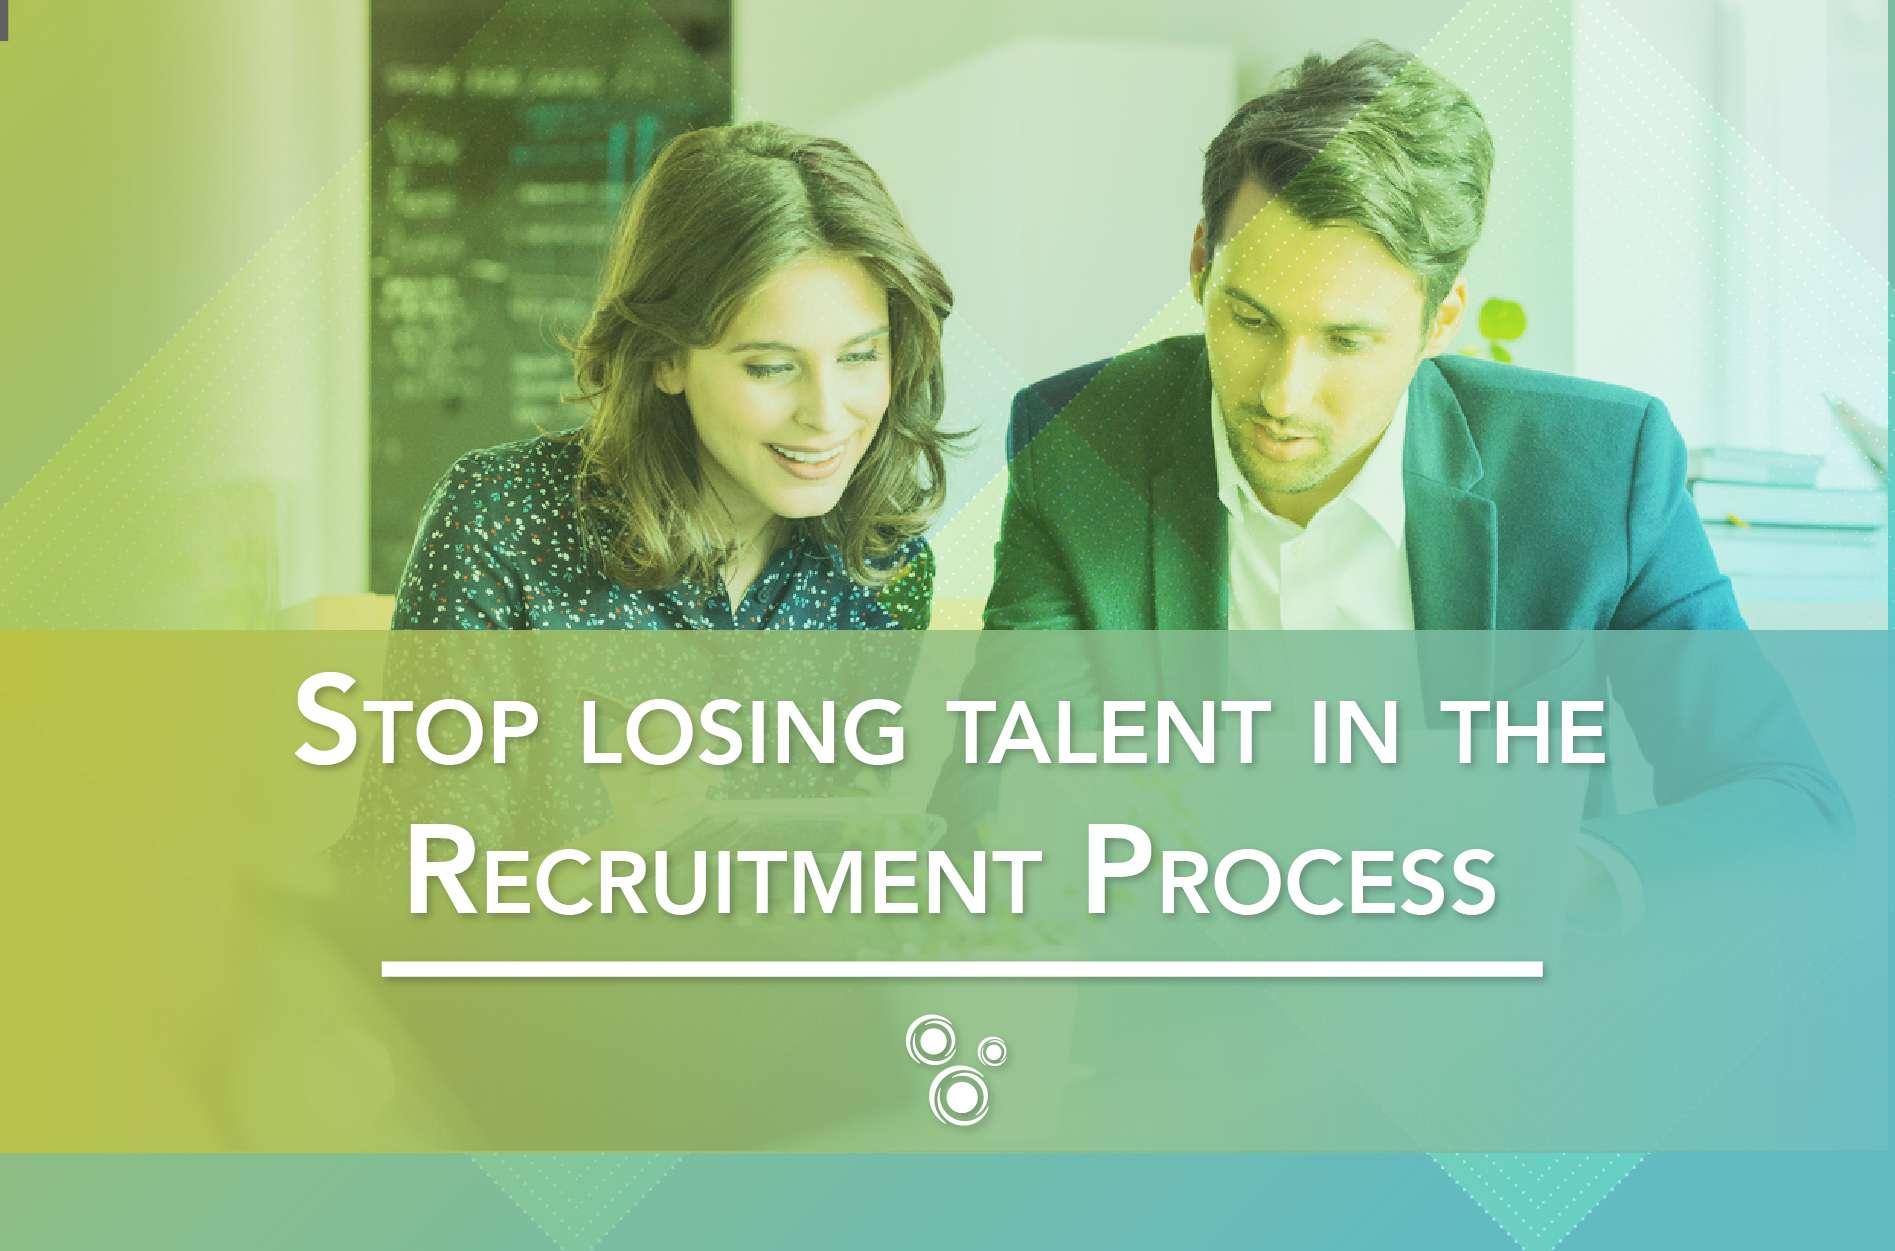 Stop losing talent in the Recruitment Process